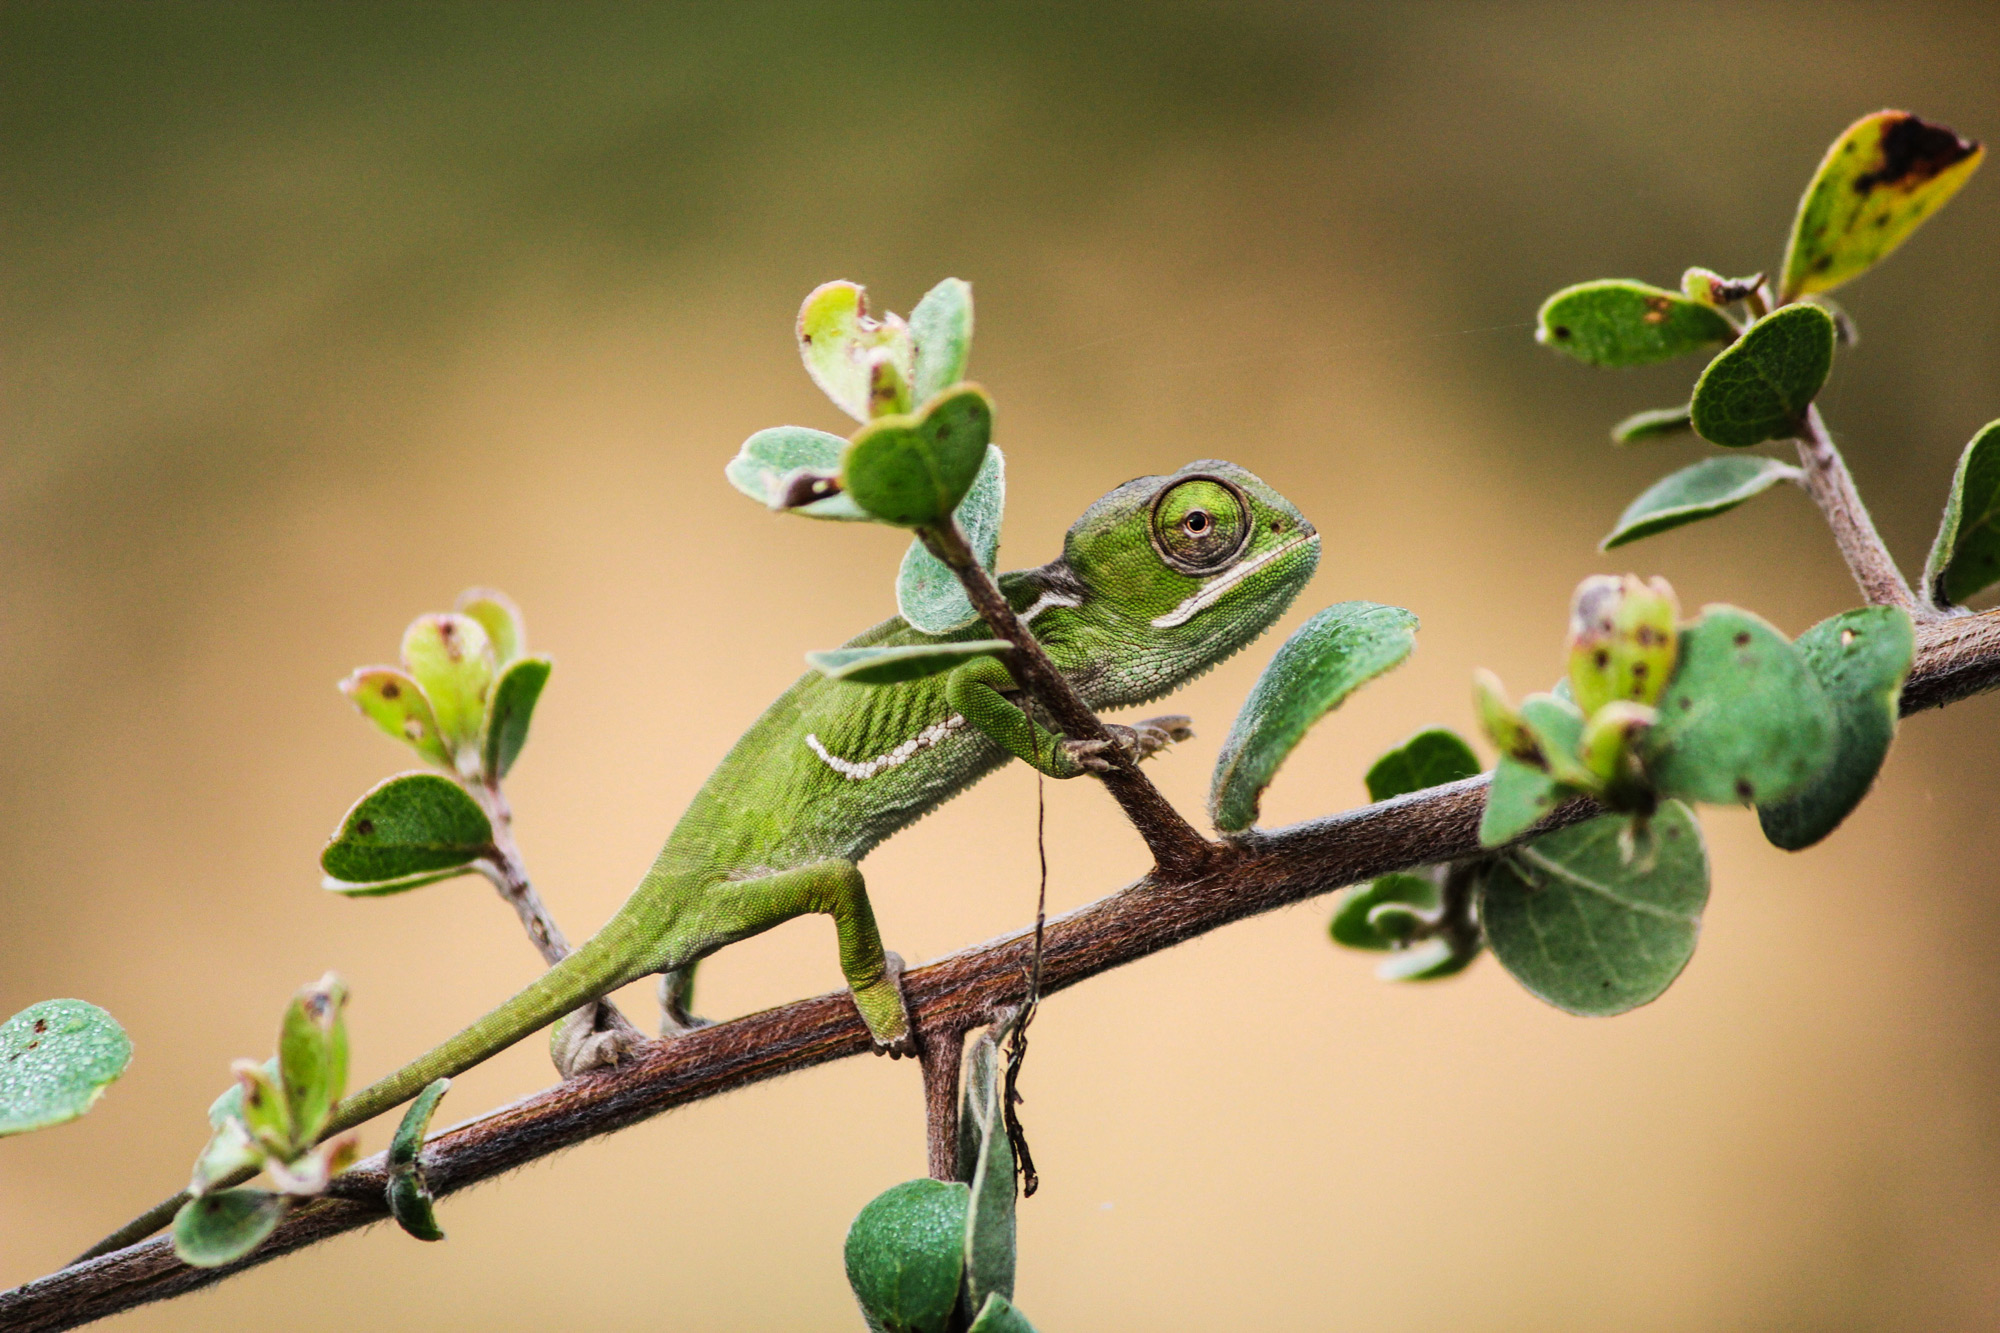 A baby chameleon photographed during the day in Balule Private Nature Reserve, South Africa